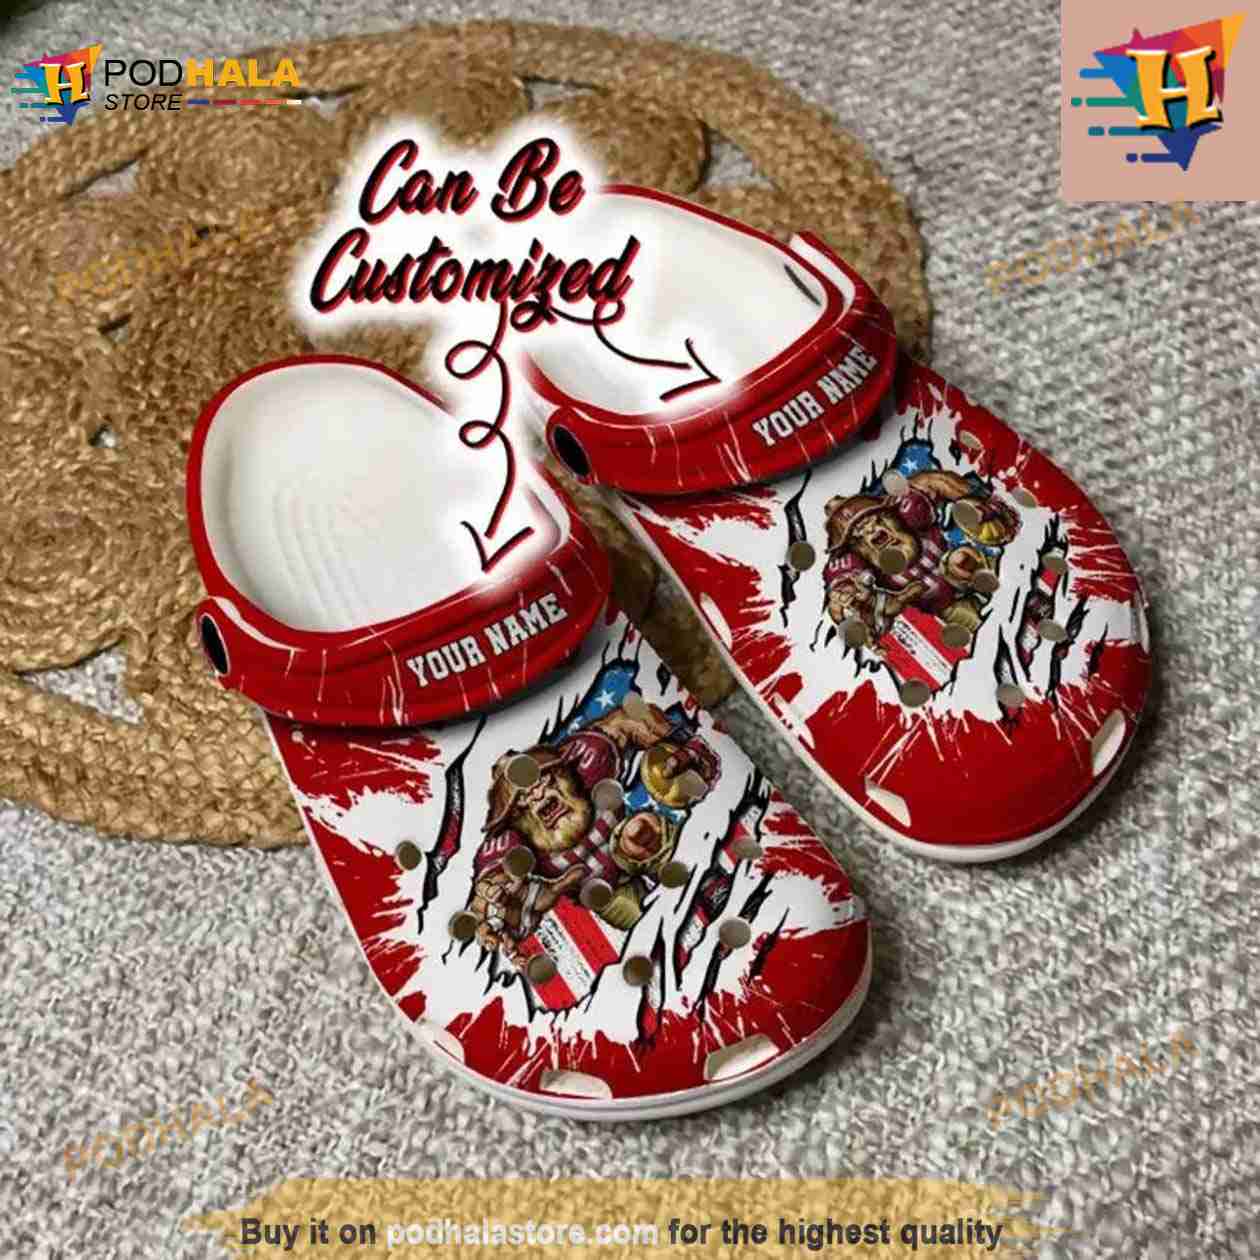 Philippines Flag Personalized Crocs Shoes With Your Name